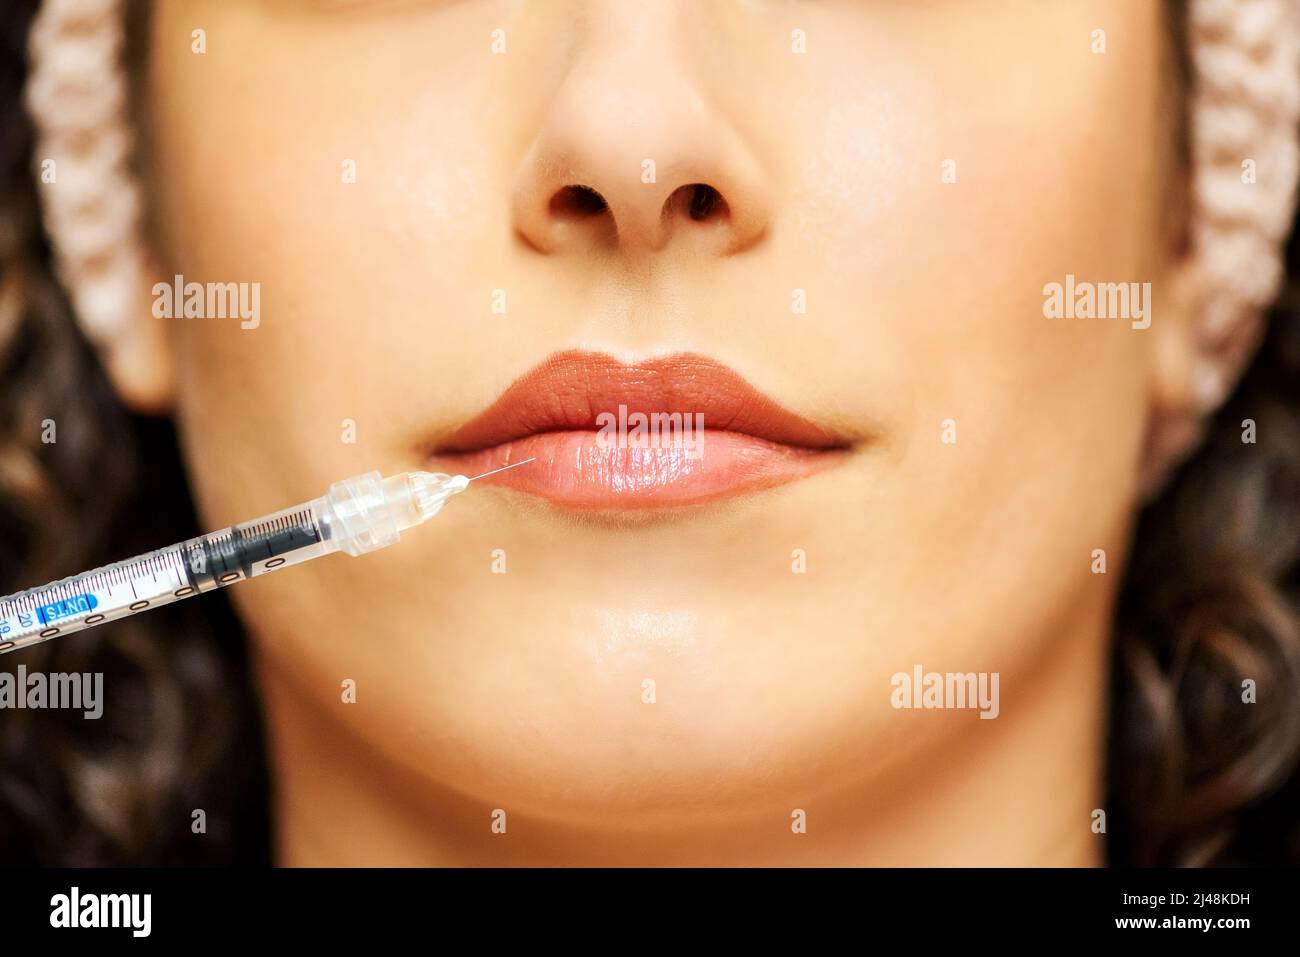 Closeup selective focus of syringe with thin needle injecting filler into red lips of anonymous female Stock Photo